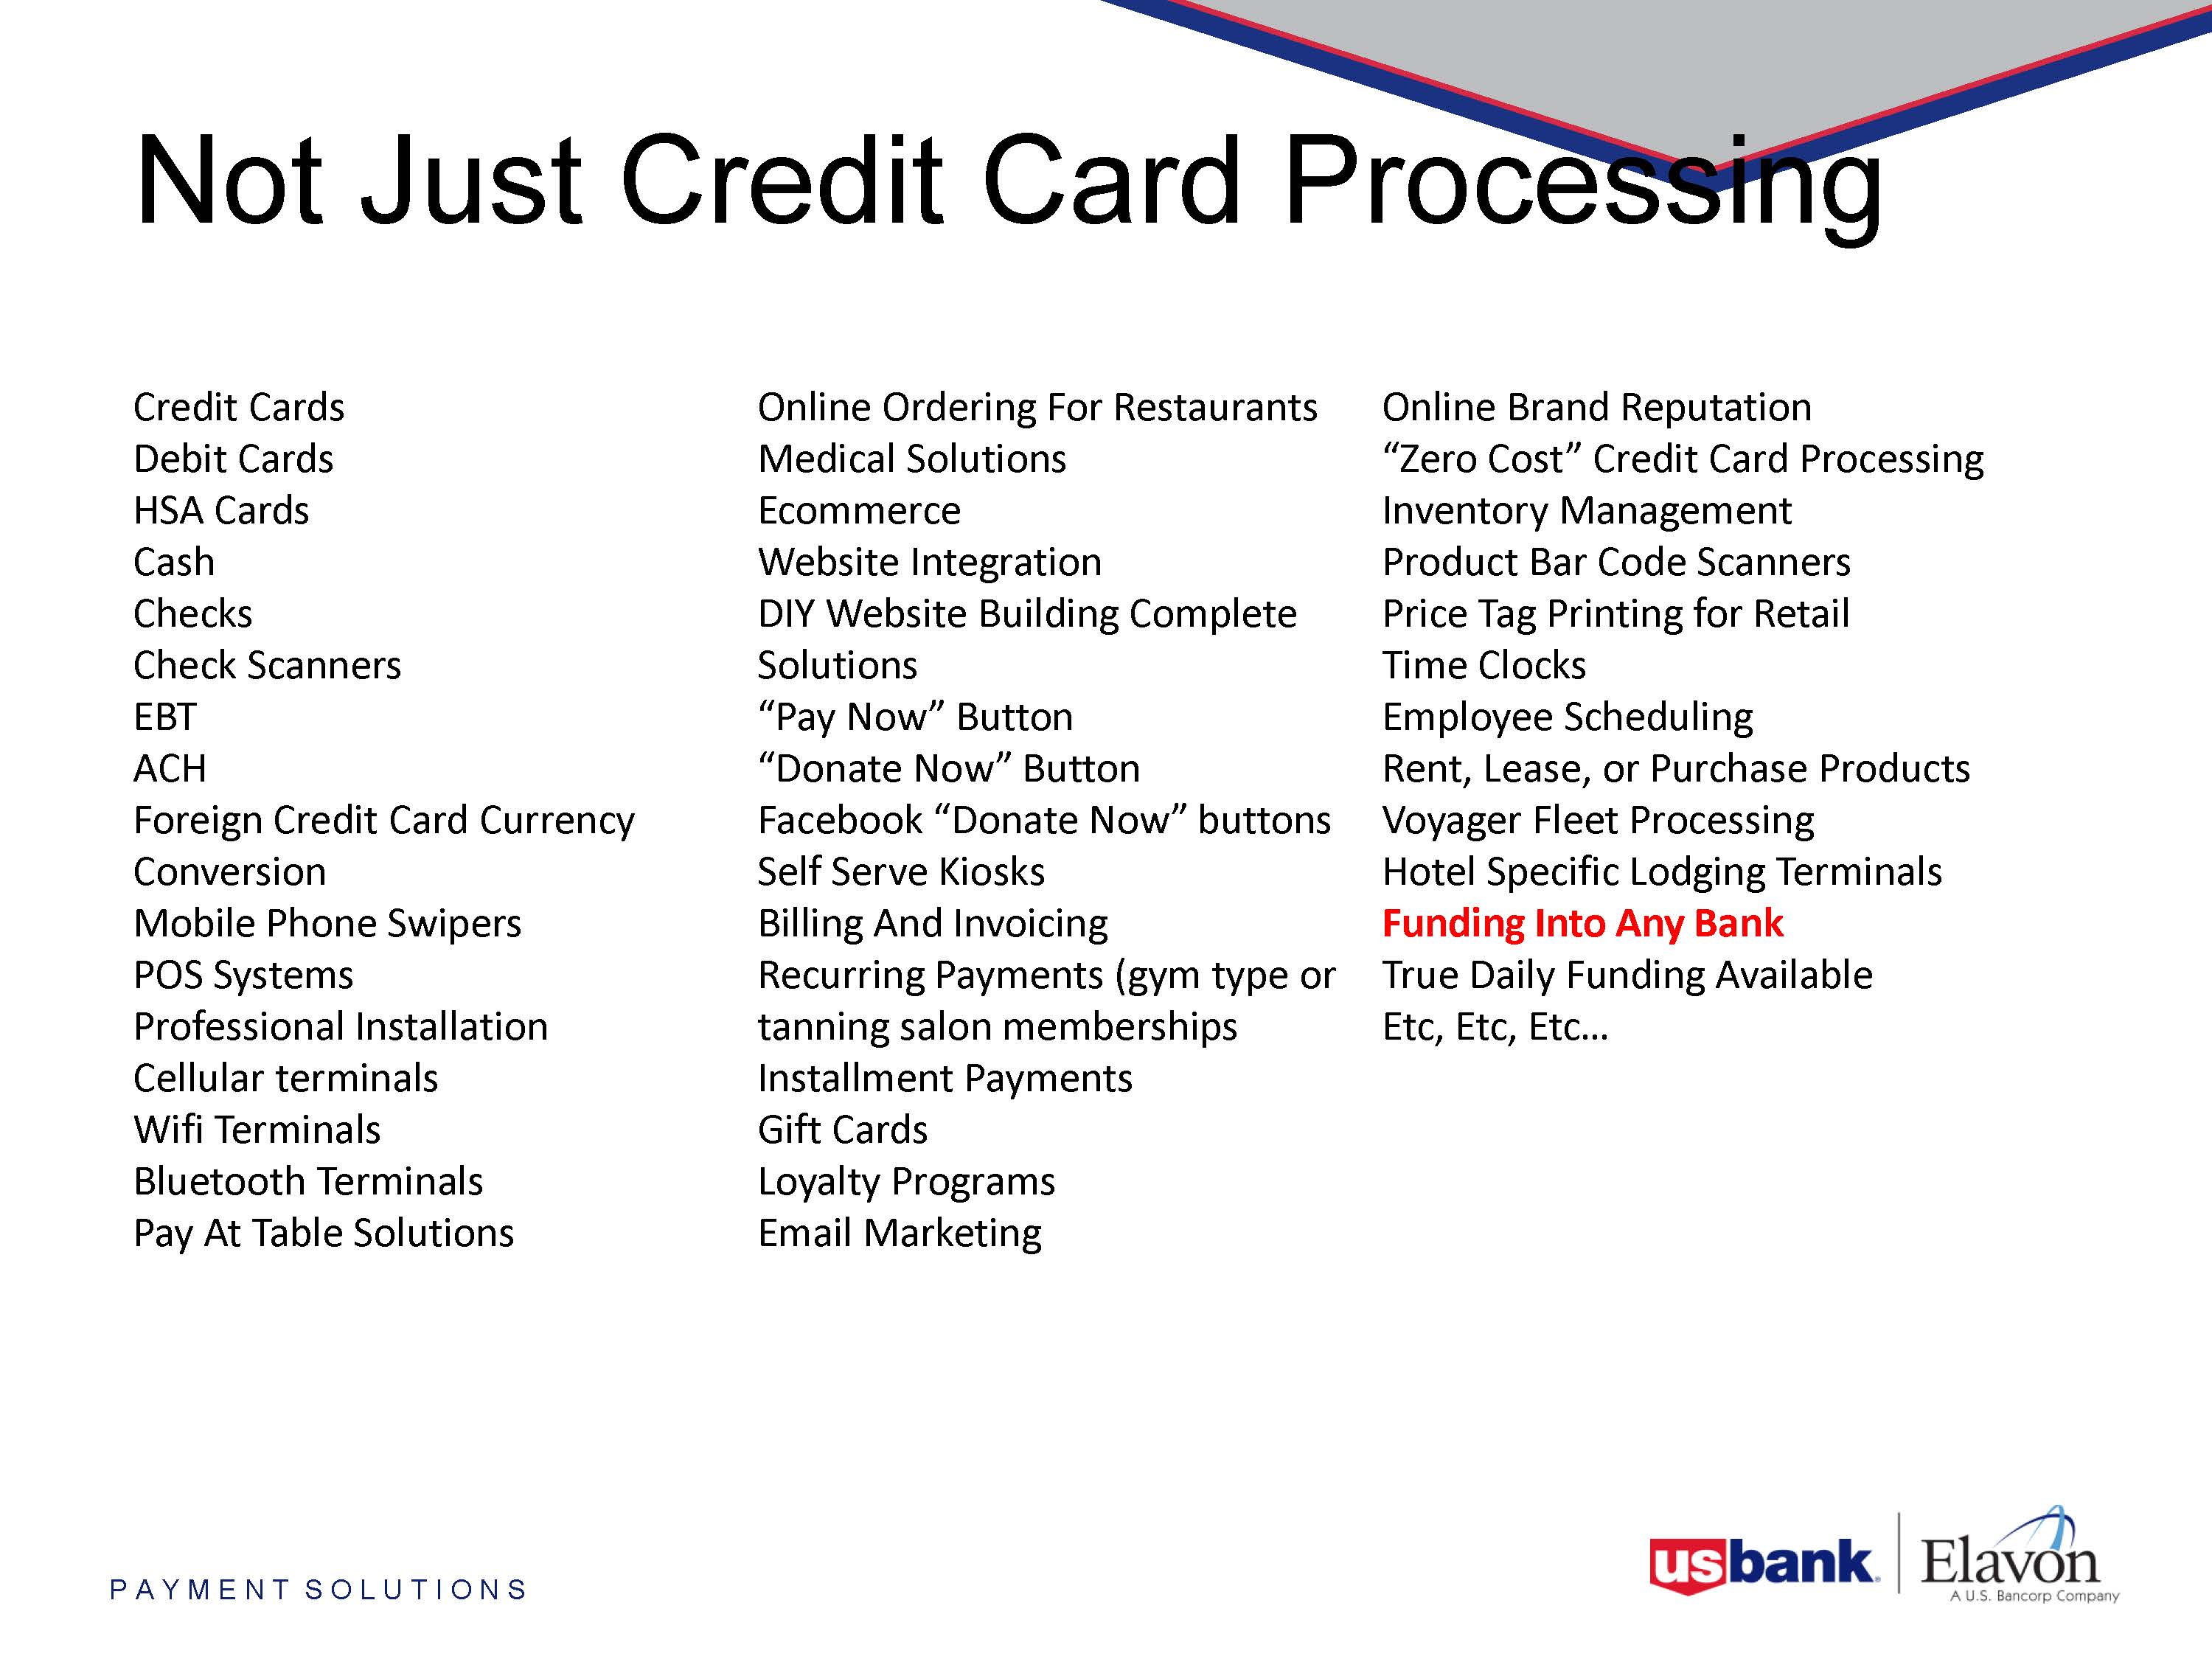 Not Just Credit Card Processing Final